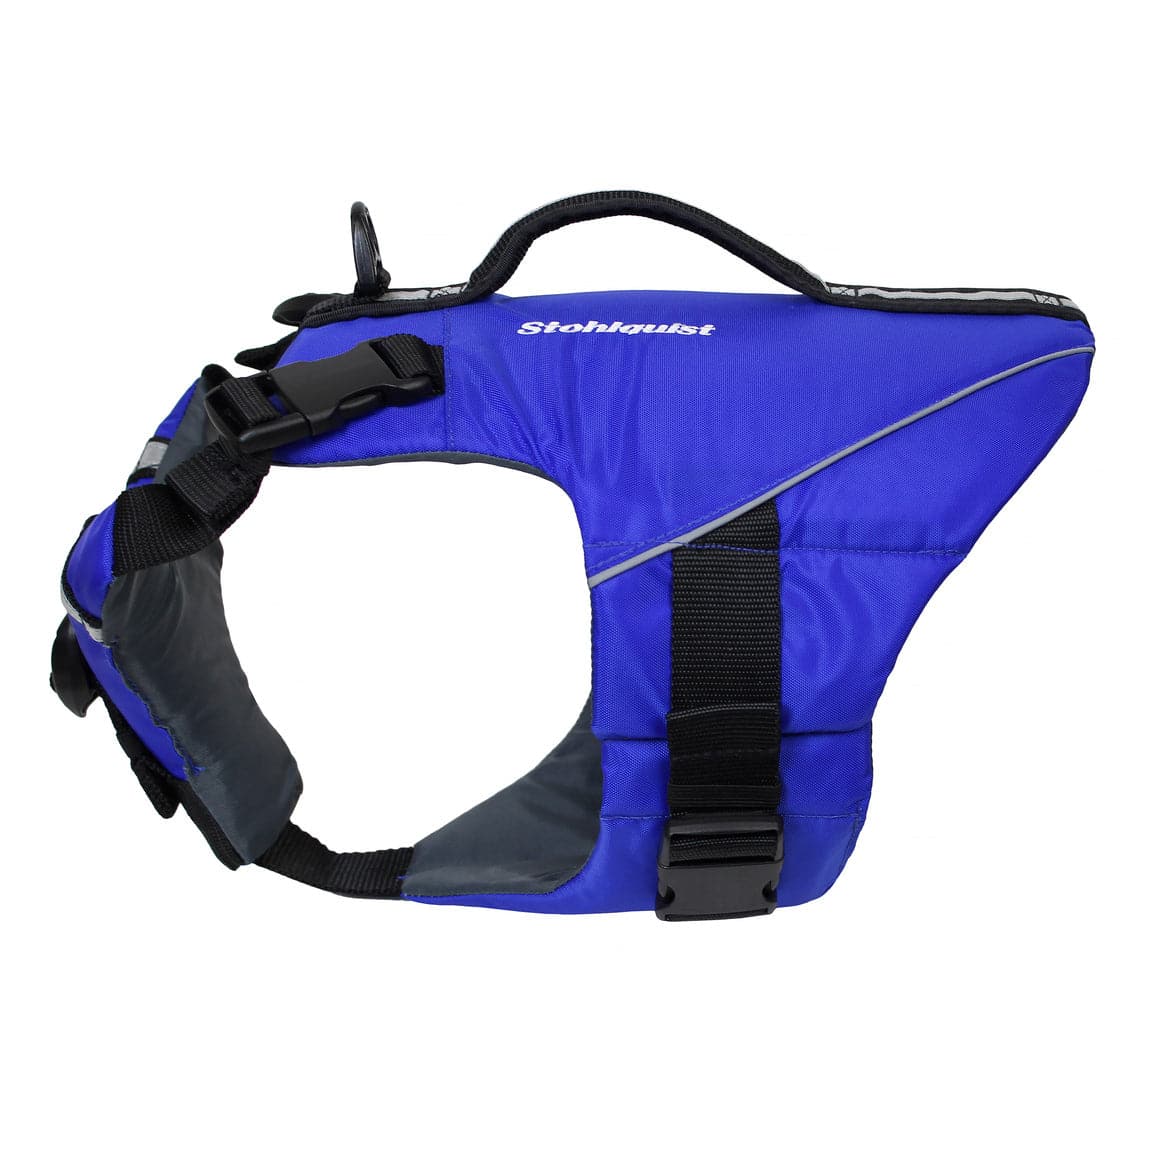 Featuring the Pup Float PFD dog pfd manufactured by Stohlquist shown here from one angle.